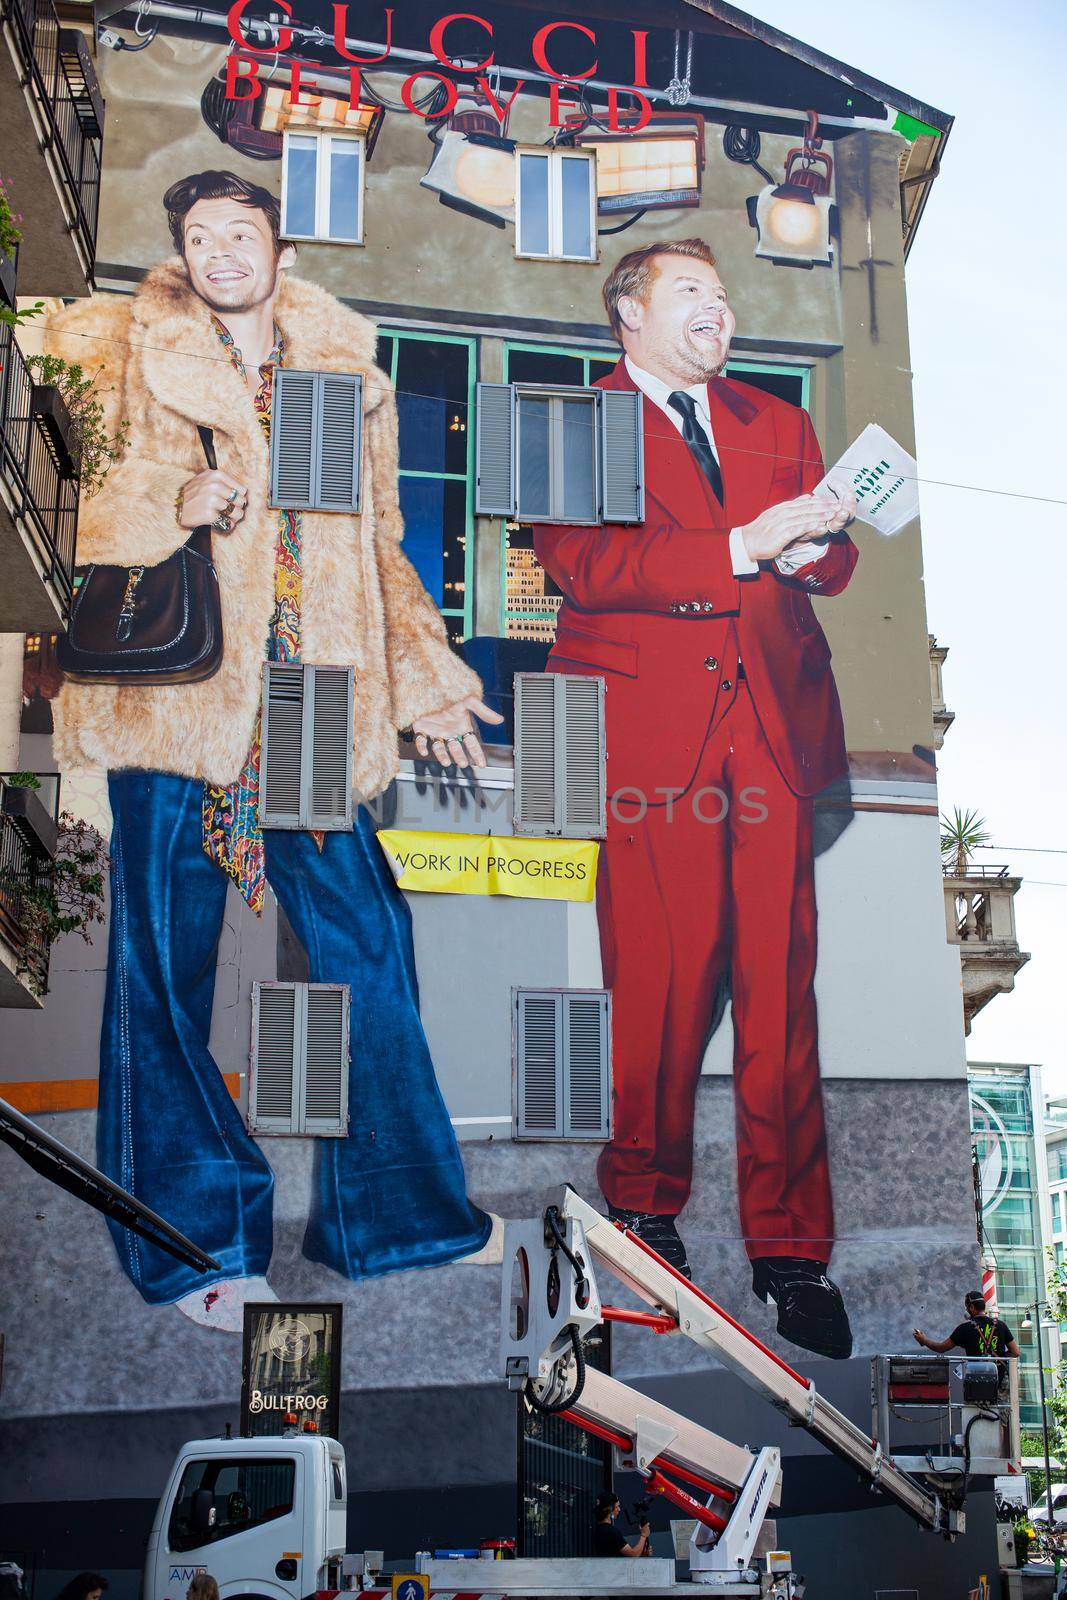 Milan, Italy - June 30: View of the Belowed show; the murales of Harry and James Corden by Harmony Korine at Gucci Wall of Milan on June 30, 2021